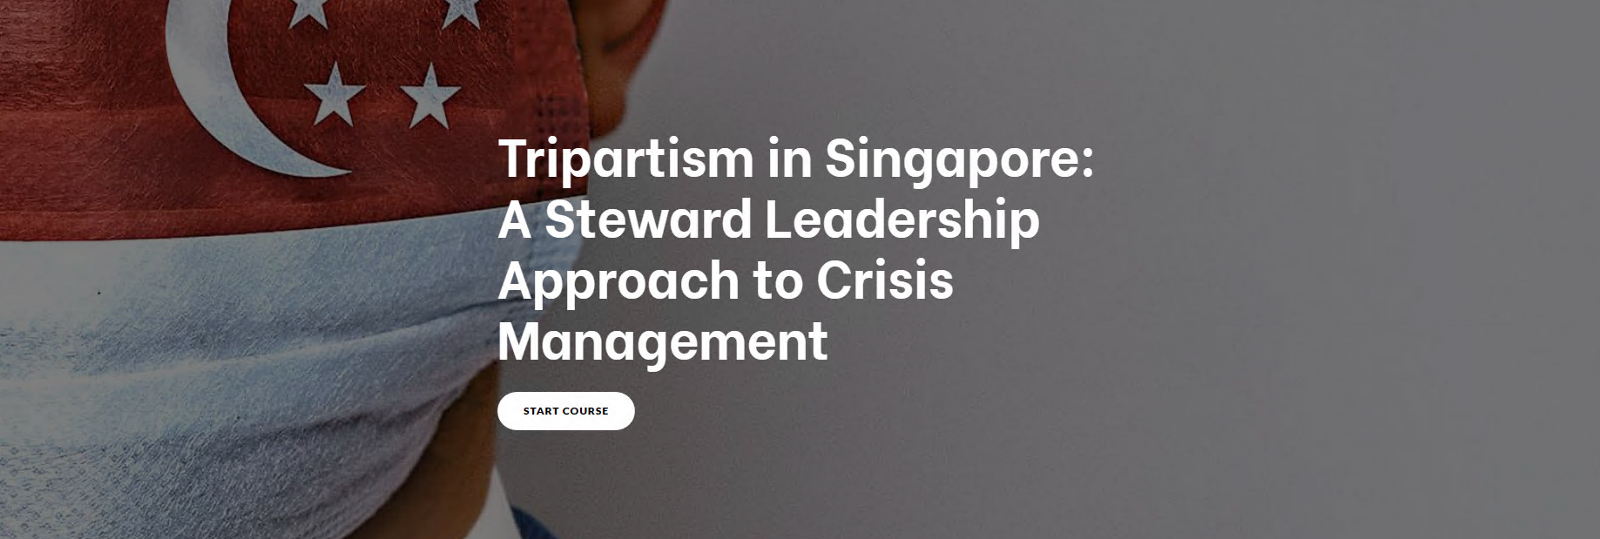 Tripartism in Singapore: A Steward Leadership Approach to Crisis Management